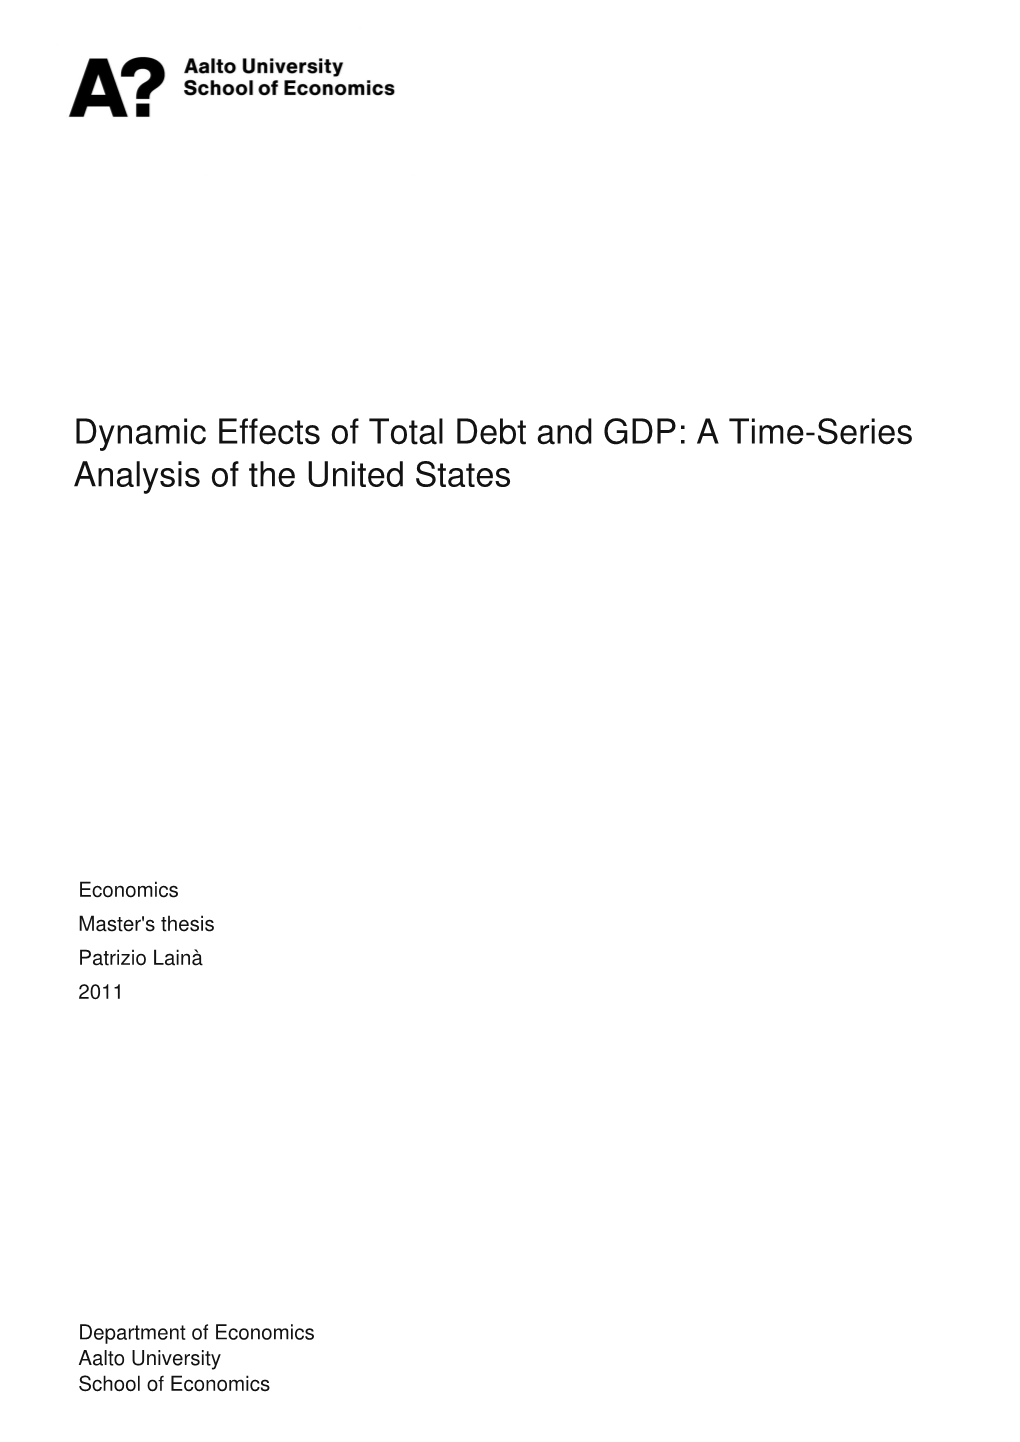 Dynamic Effects of Total Debt and GDP: a Time-Series Analysis of the United States